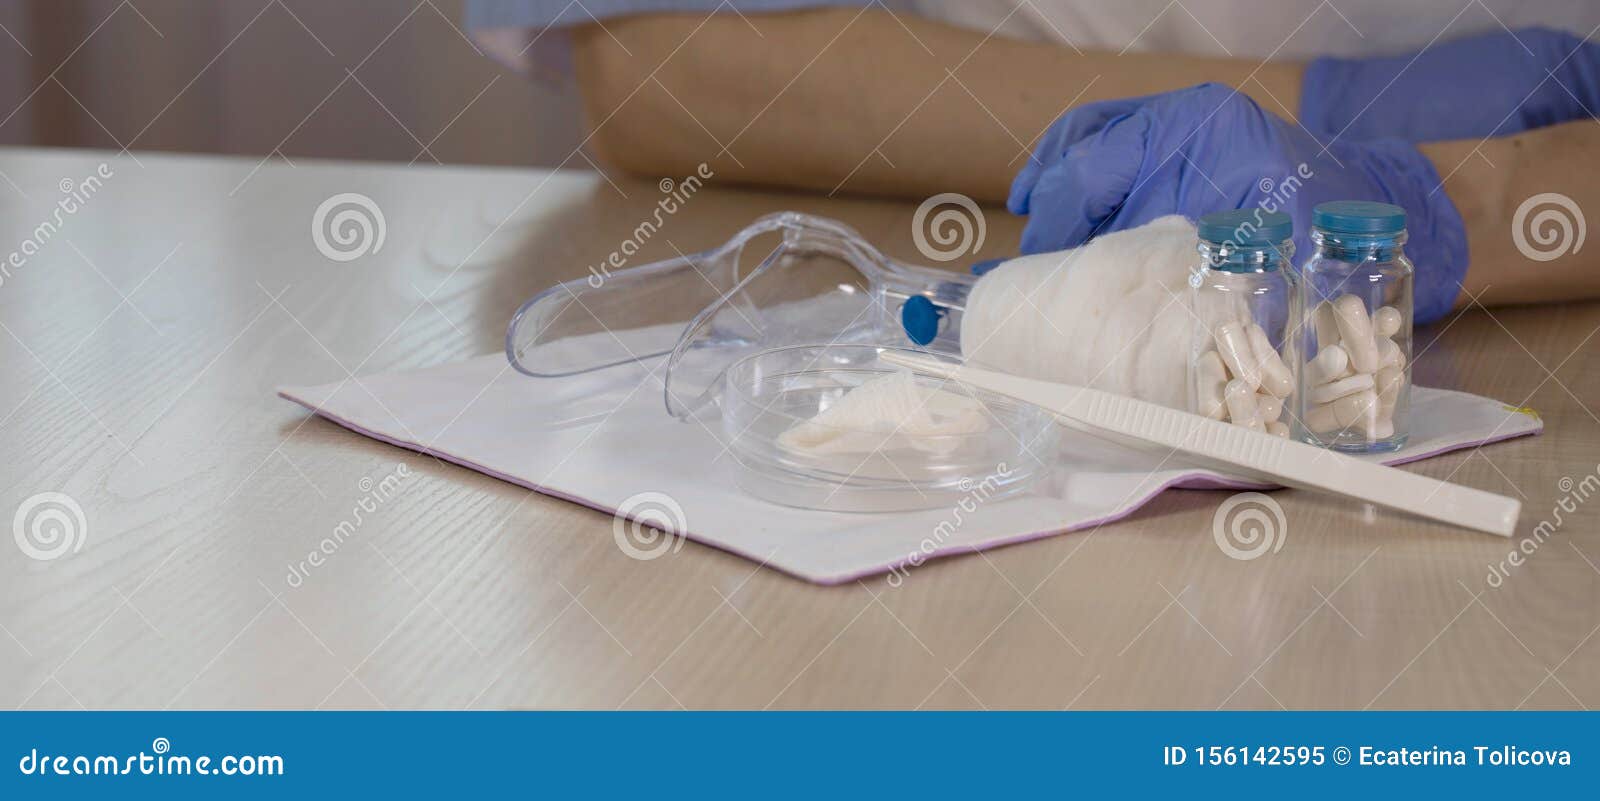 Glass Bottles With Pills In Front Of Gynecologist Vaginal Speculum In The Background Stock Image